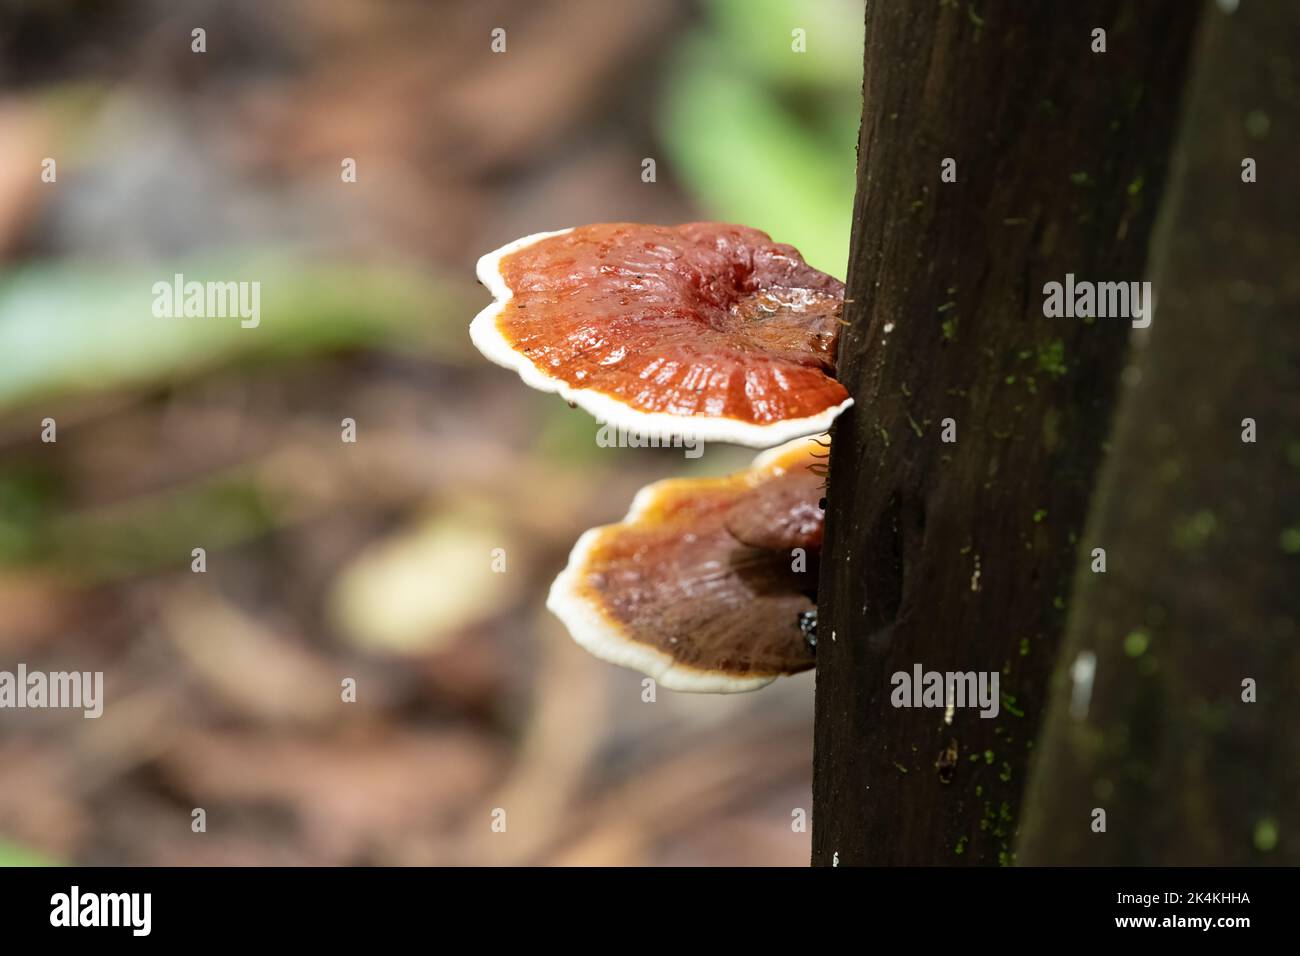 Wild mushrooms, Ganoderma lucidum growing on the side of a tree trunk in the forests of Goa in India. Stock Photo